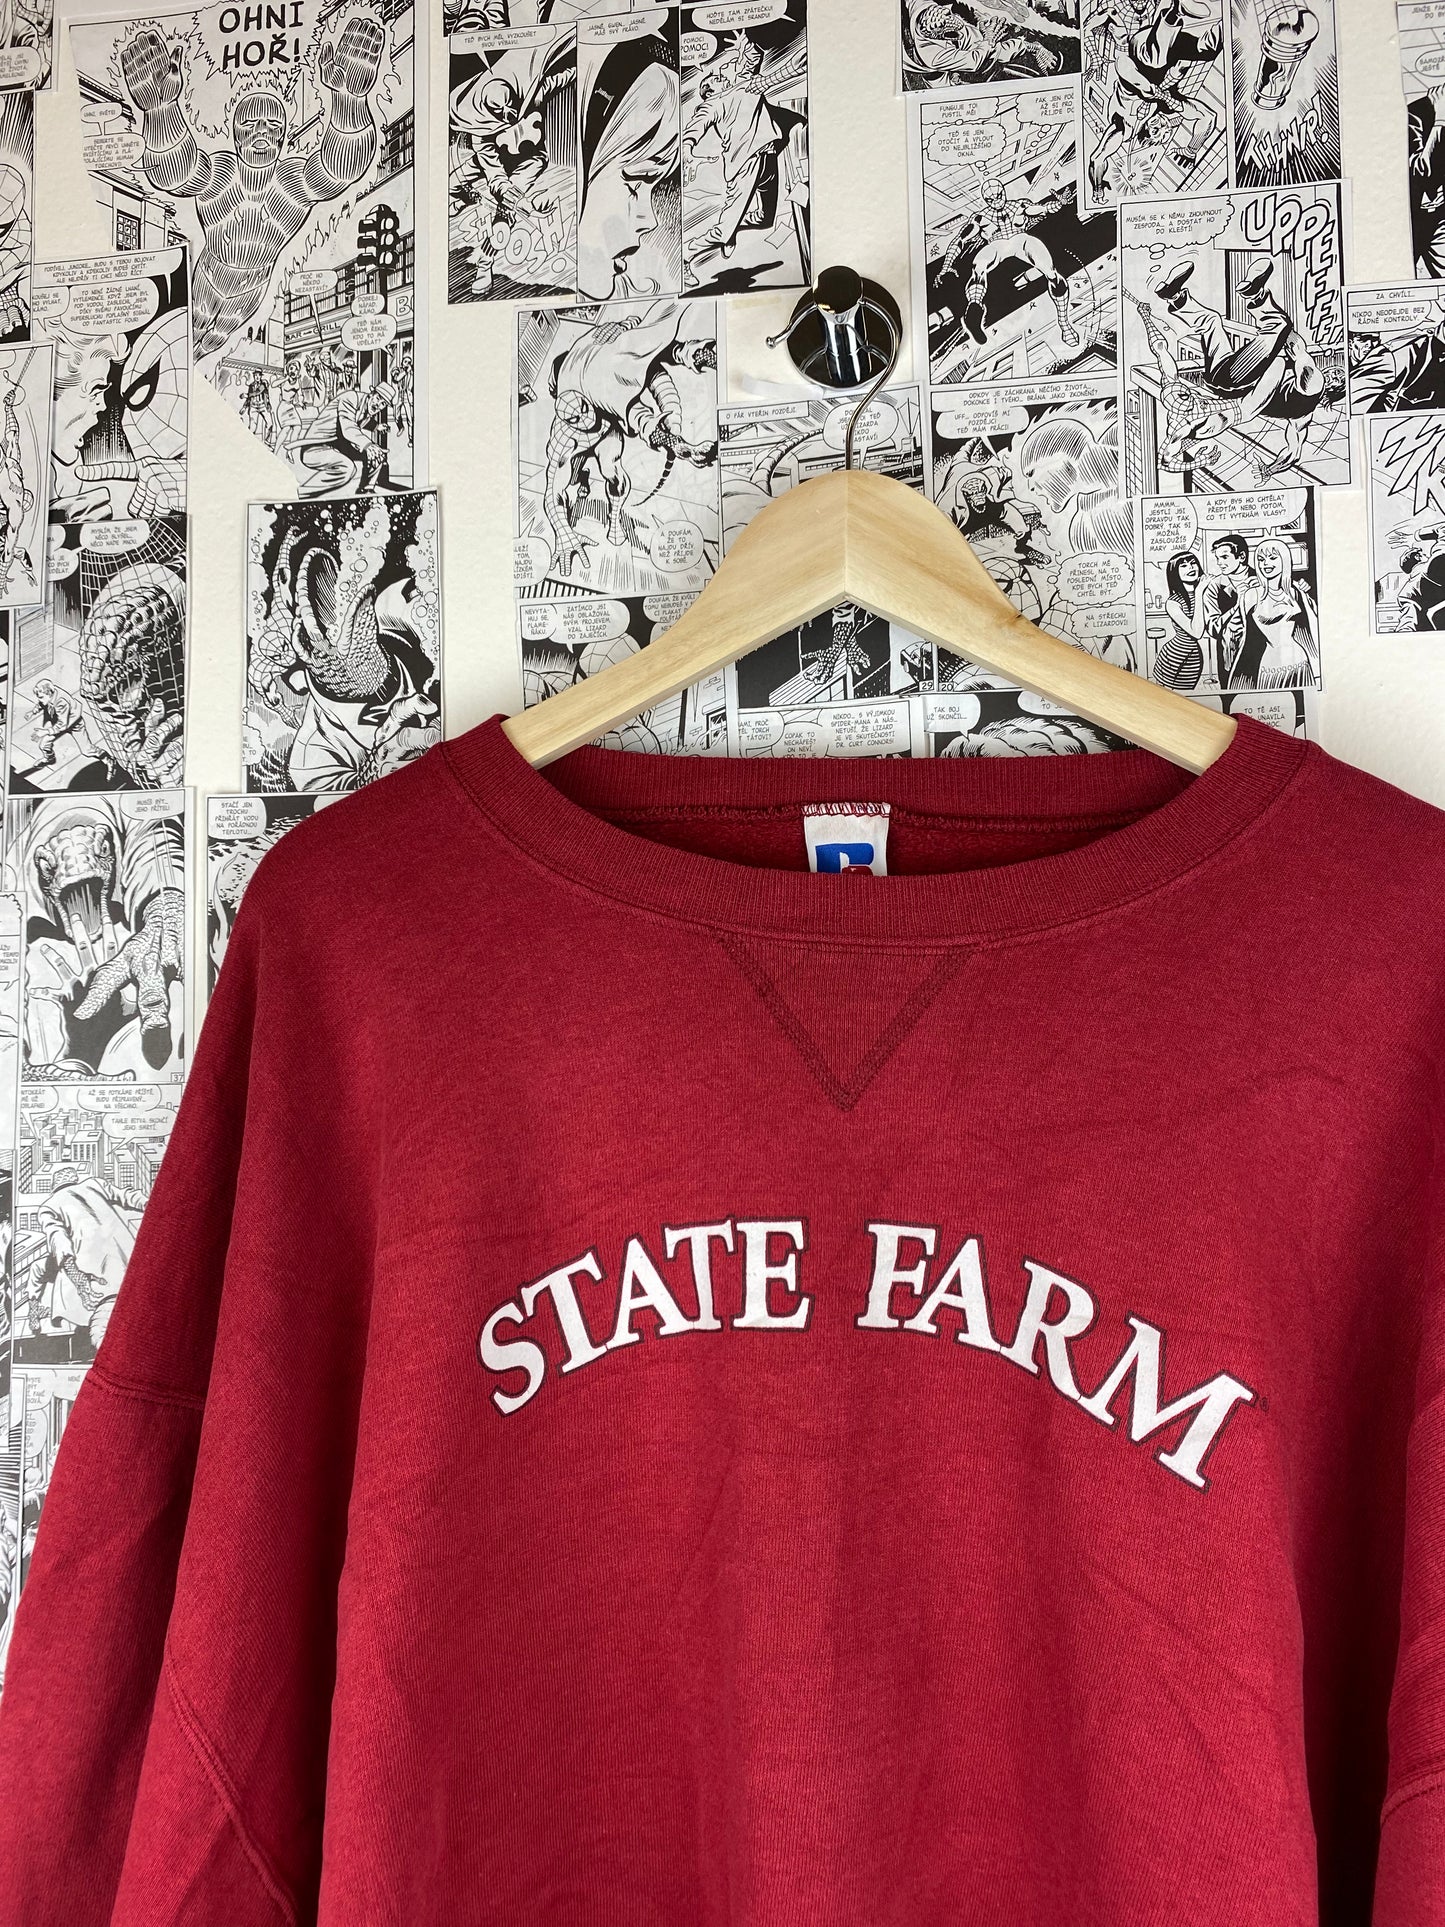 Vintage “State Farm” Russell 90s Crewneck - size XXL